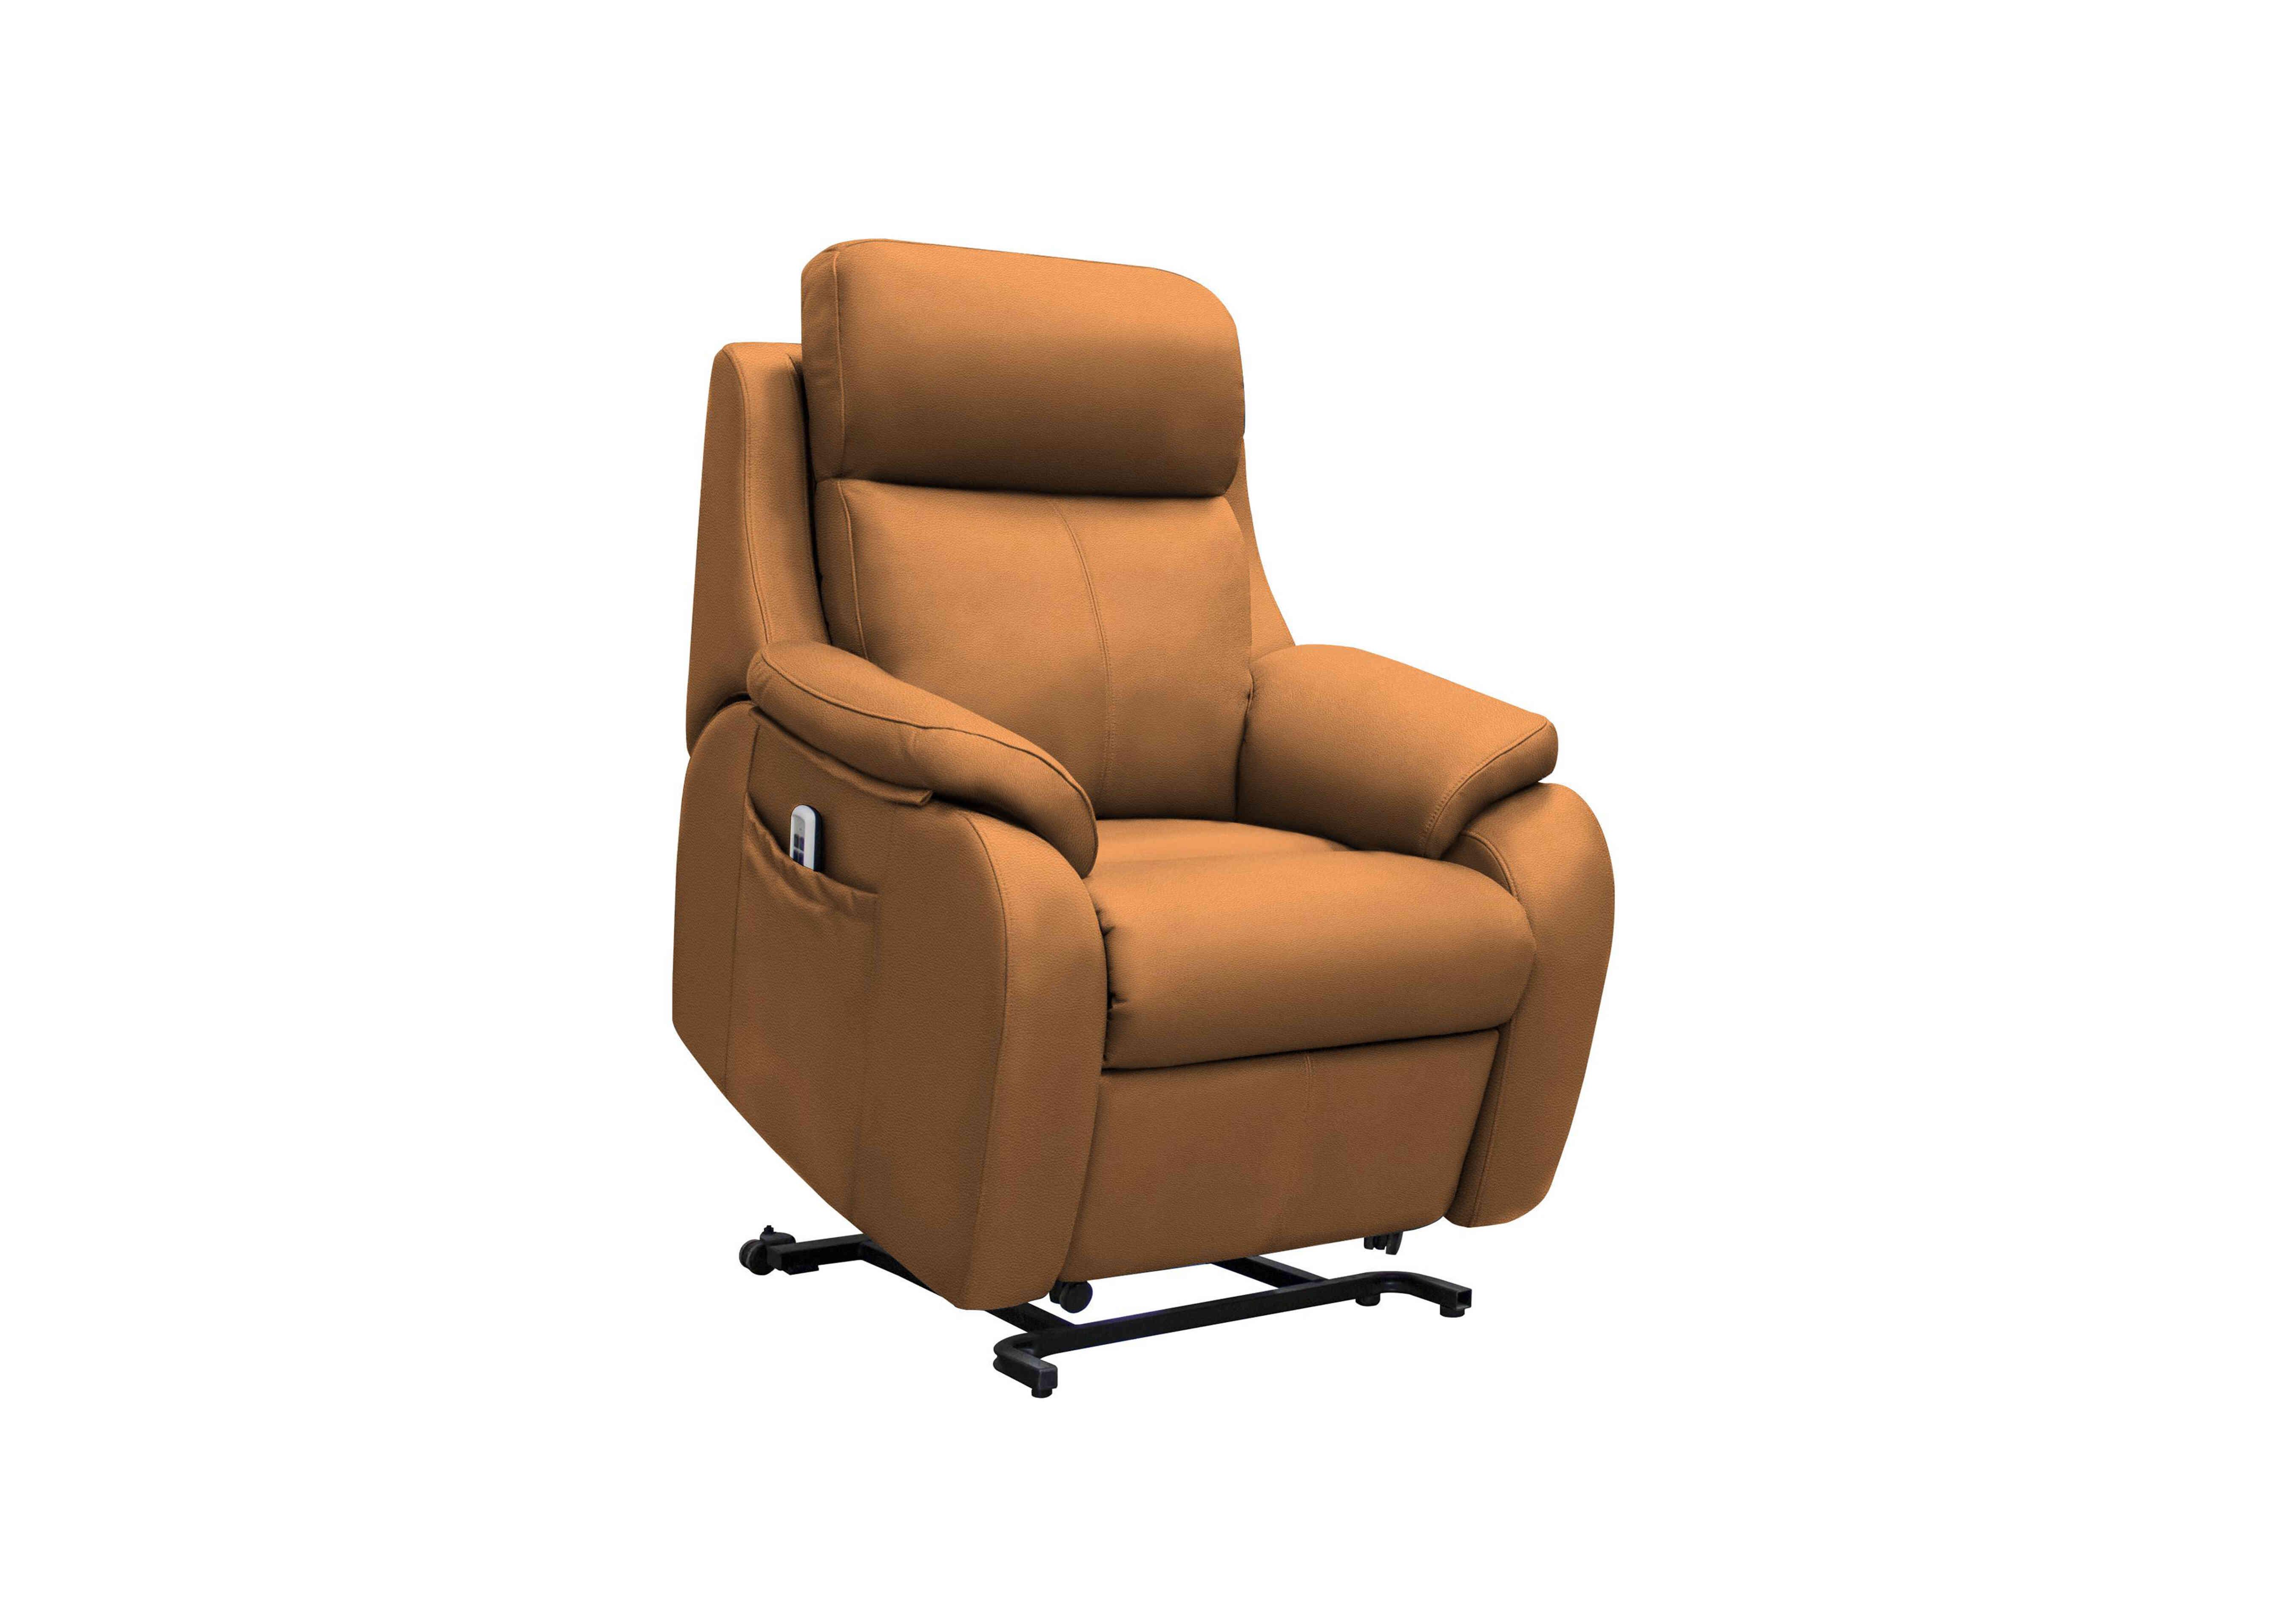 Kingsbury Large Leather Lift and Rise Chair in L847 Cambridge Tan on Furniture Village